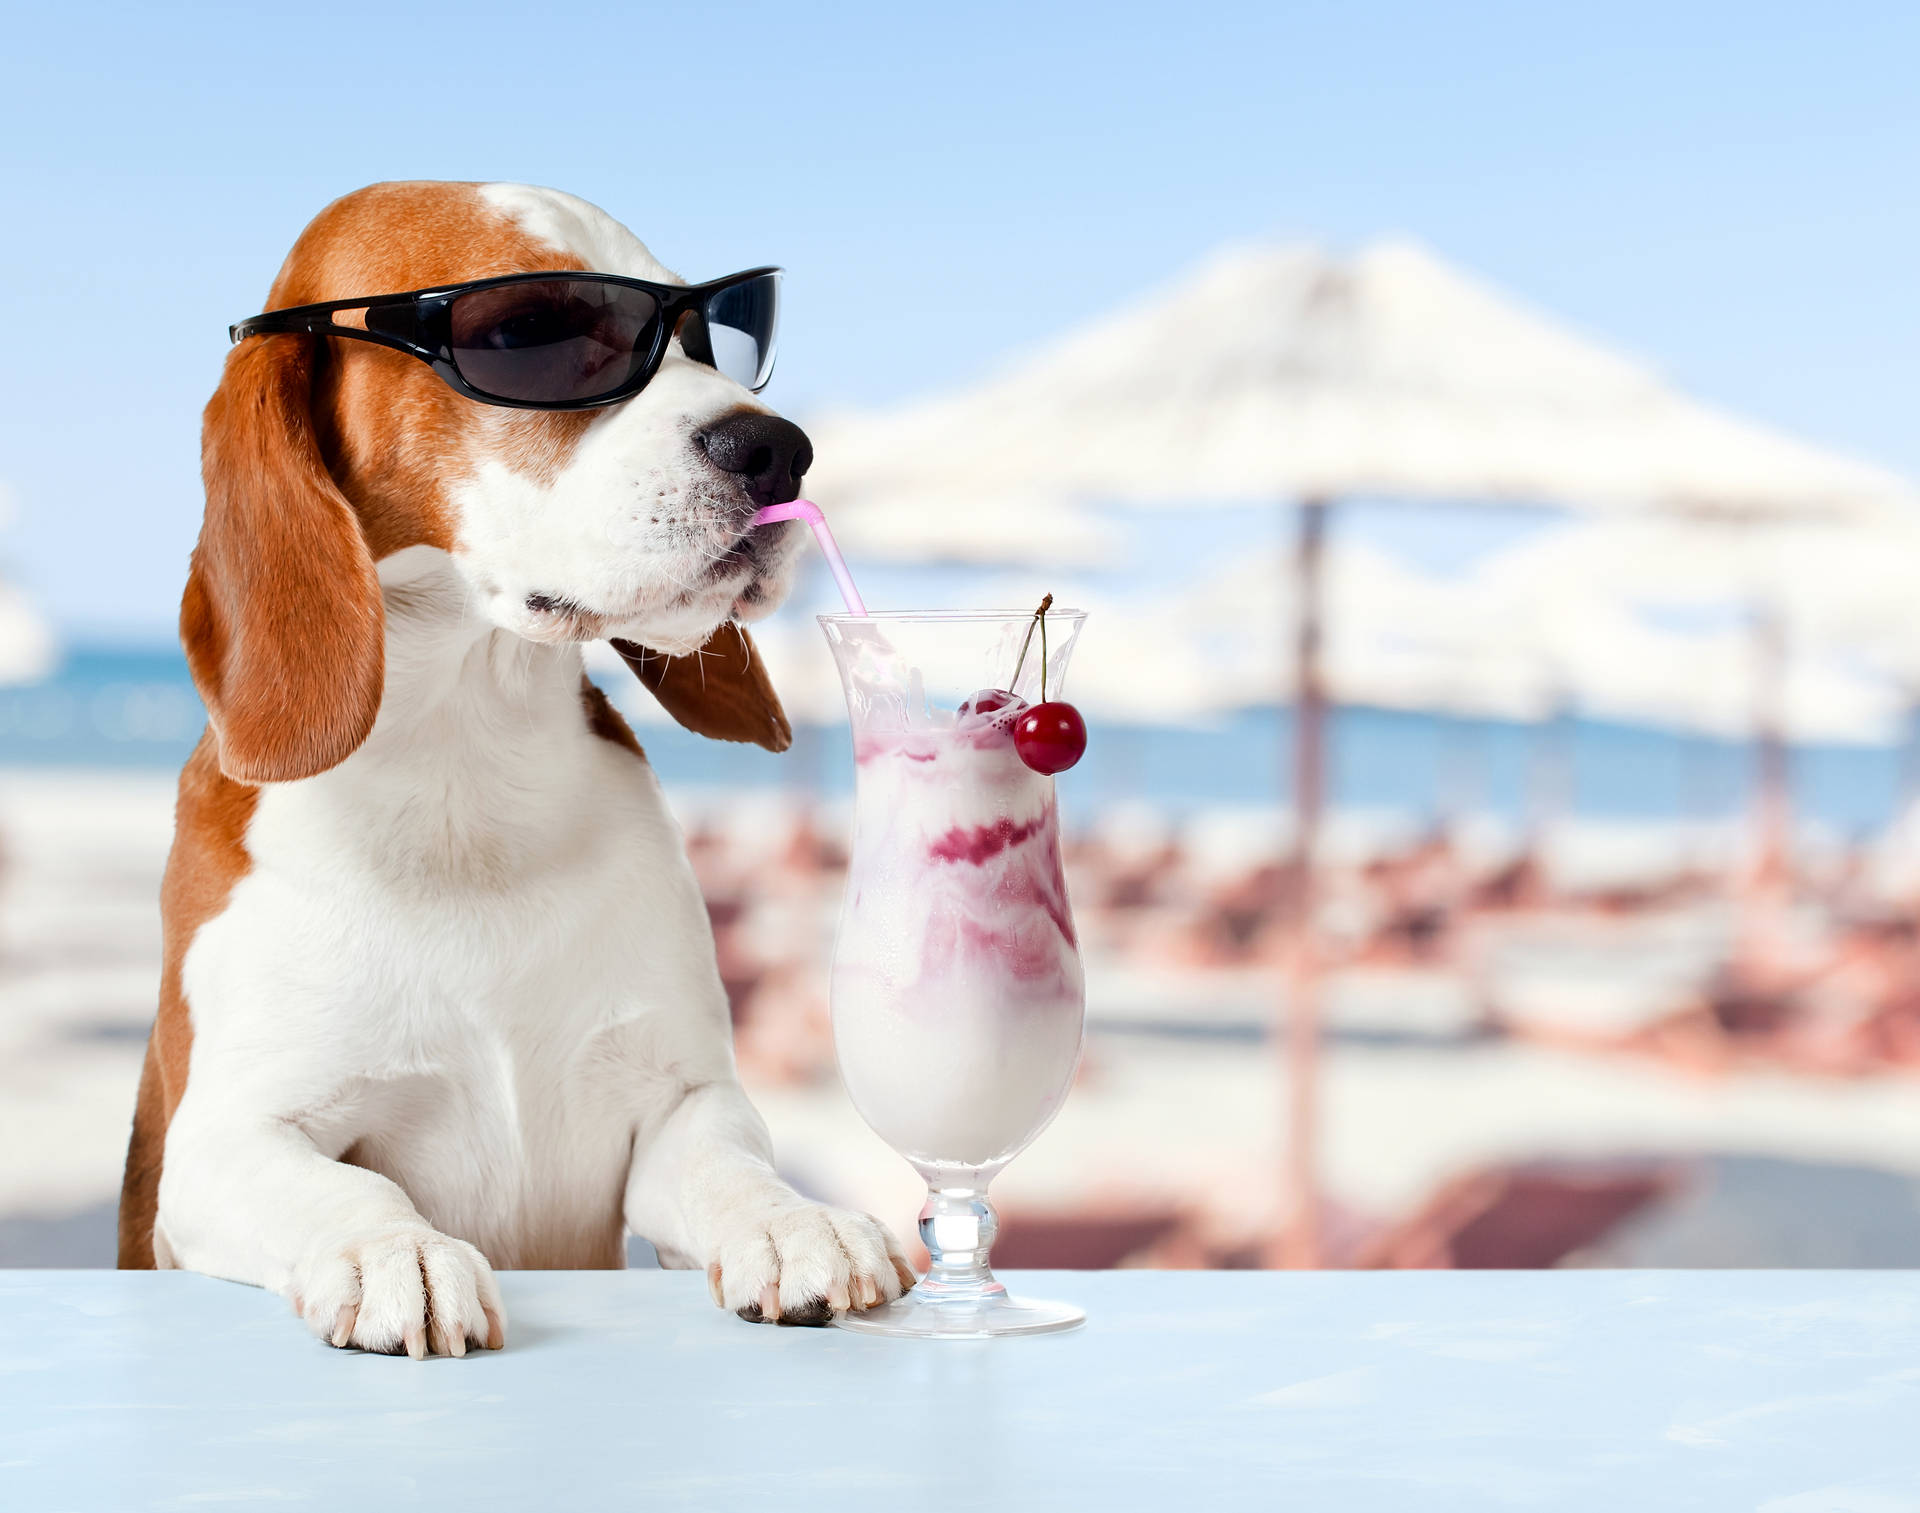 Free Beagle Wallpaper Downloads, [100+] Beagle Wallpapers for FREE |  